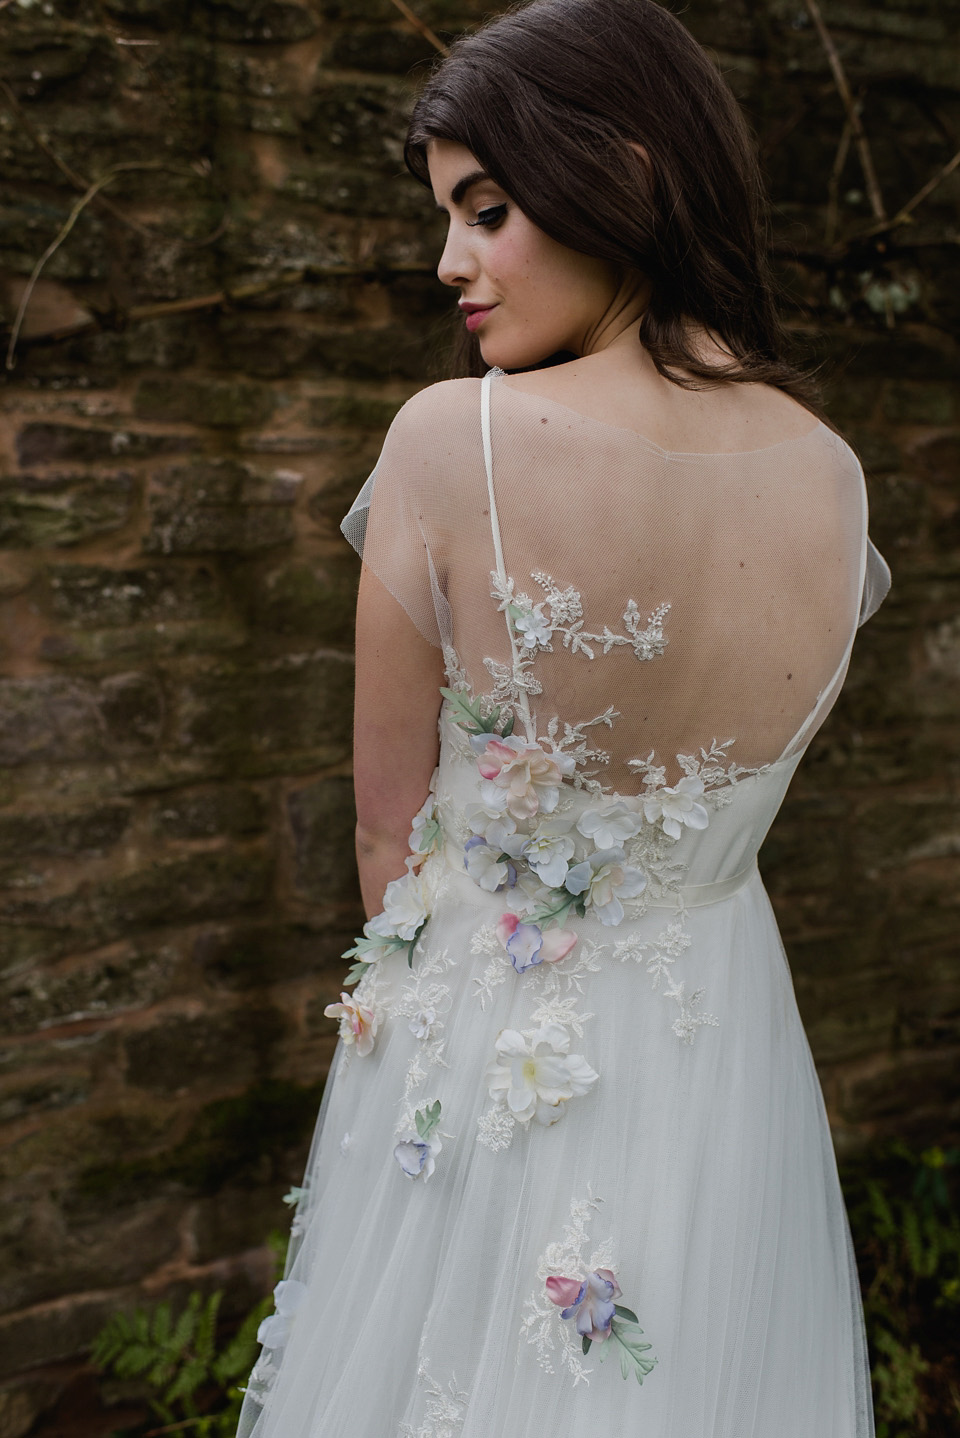 Floral wedding dresses and beauteous bridal details and table decor. All the suppliers involved in this shoot are listed on the Mr & Mrs Smith directory of alternative wedding suppliers. Visit mrandmrsunique.co.uk. Photography by Alexa Loy.